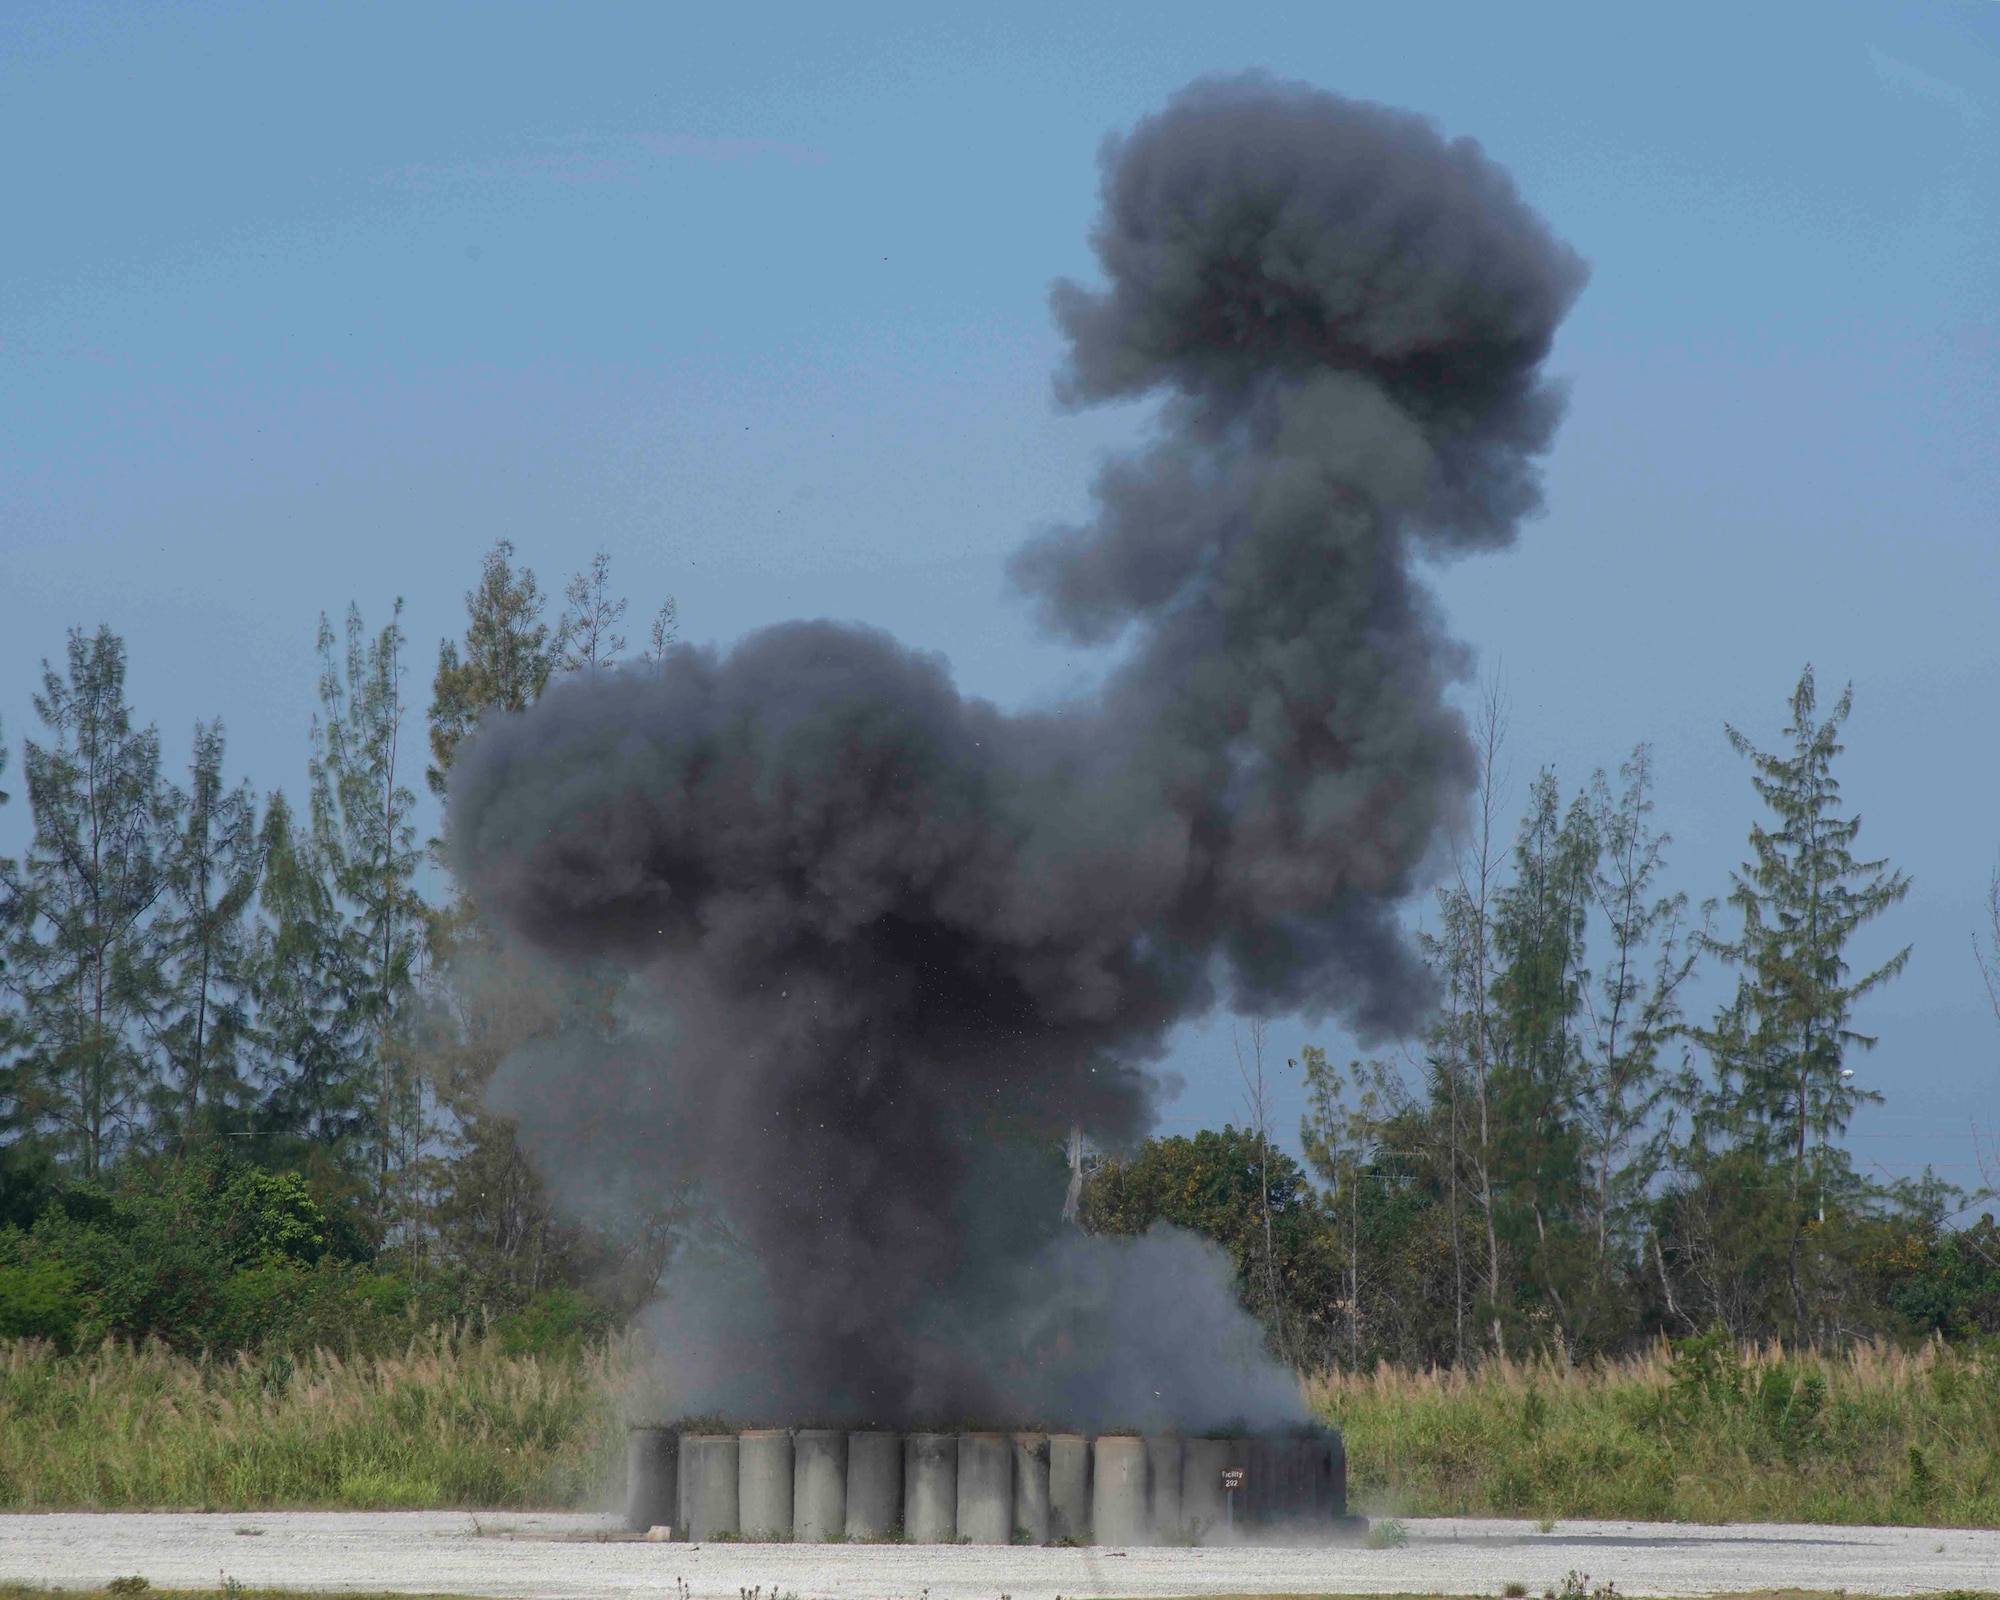 A cloud of smoke rises from a detonation conducted by the 482nd Civil Engineering Squadron Explosive Ordnance Disposal Flight at Homestead Air Reserve Base, Fla., March 25. The EOD Flight conducts this type of training regularly, as required. (U.S. Air Force photo by Staff Sgt. Jaimi L. Upthegrove)